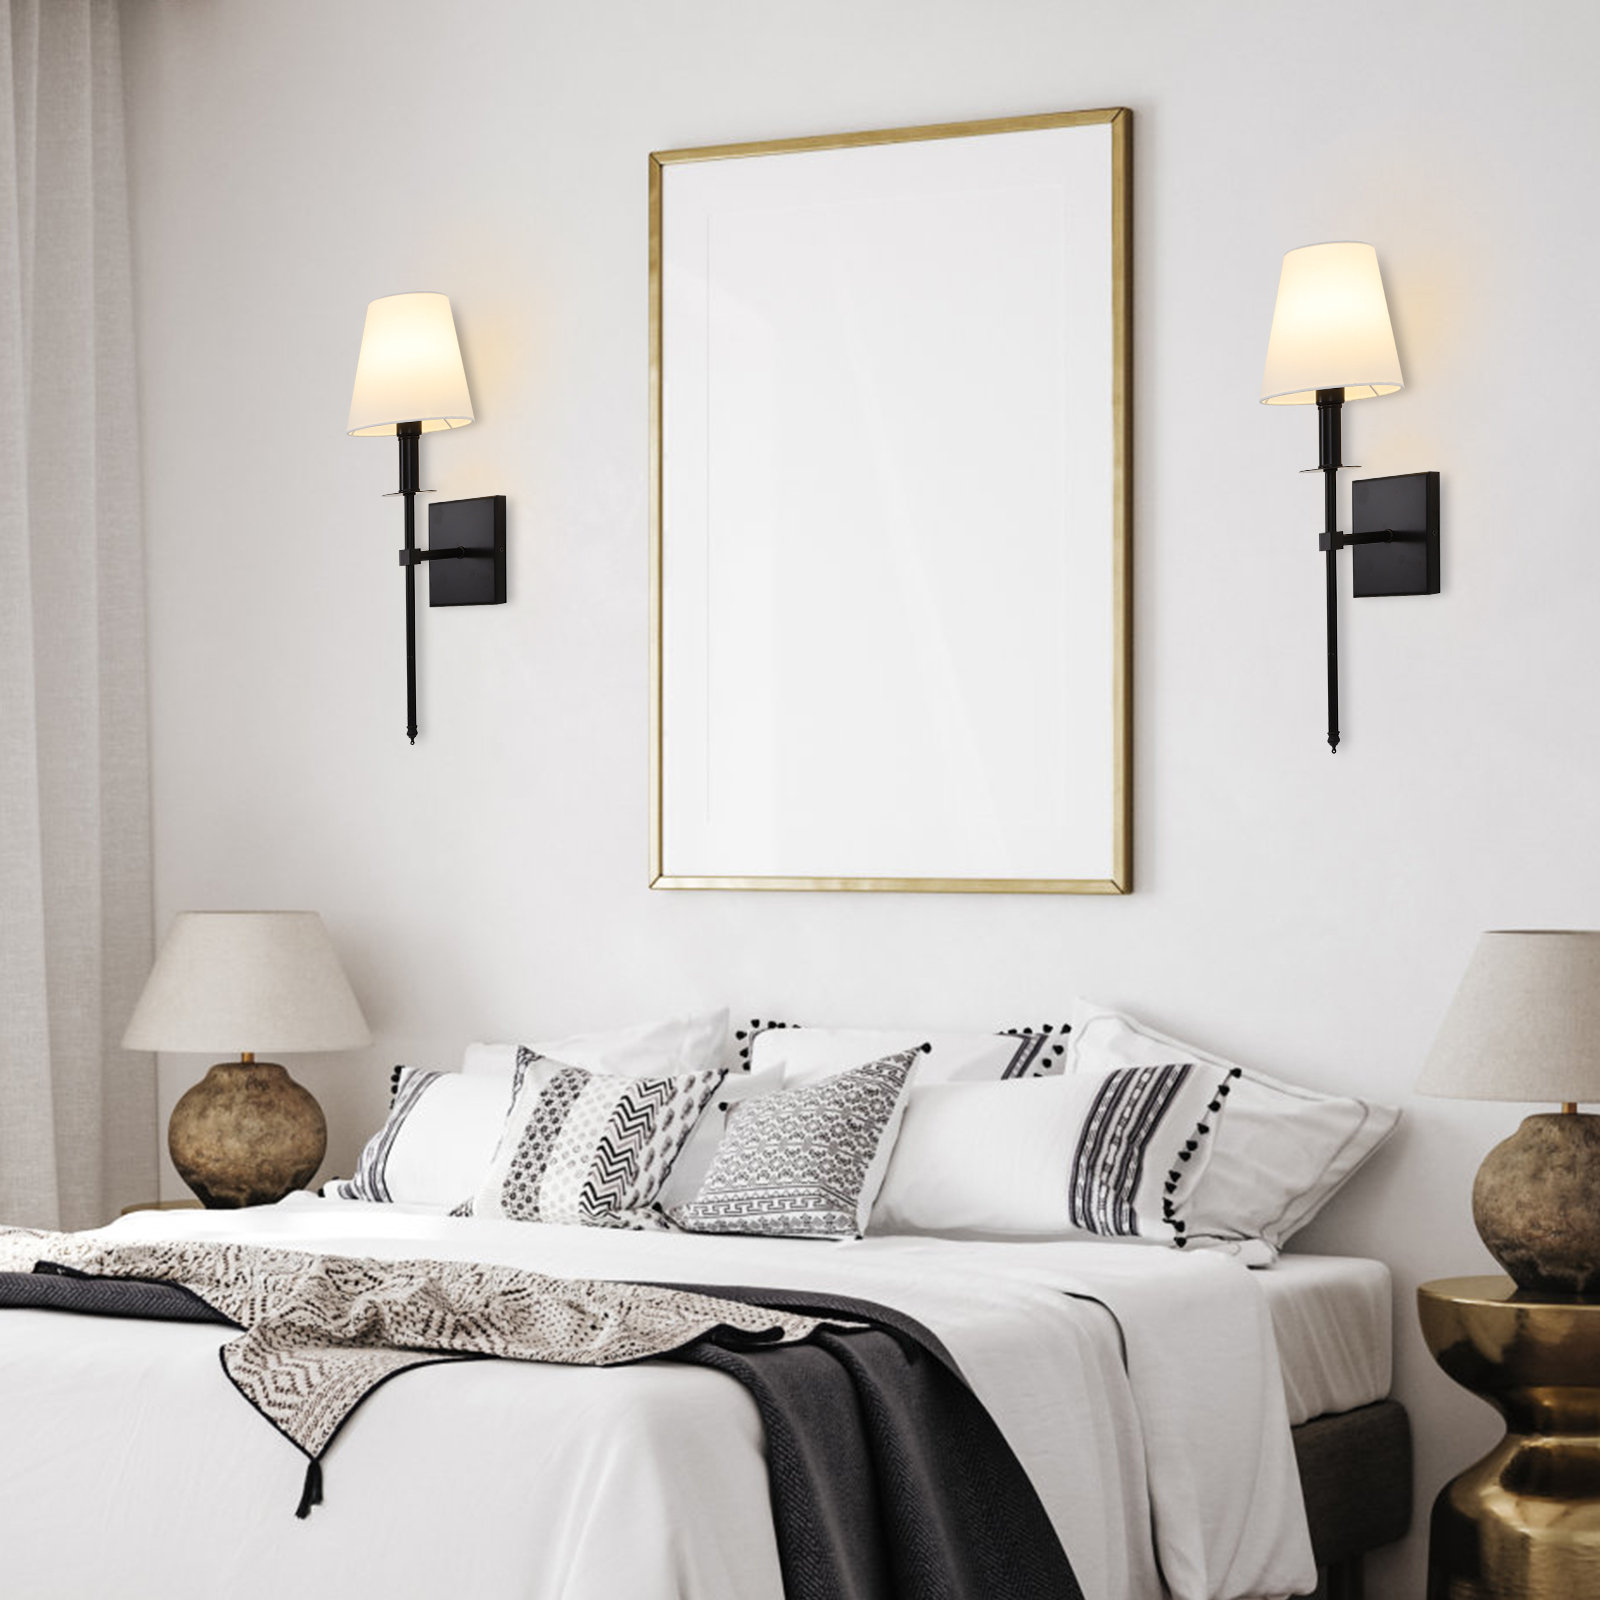 10 Best Bedroom Wall Sconces for 2023